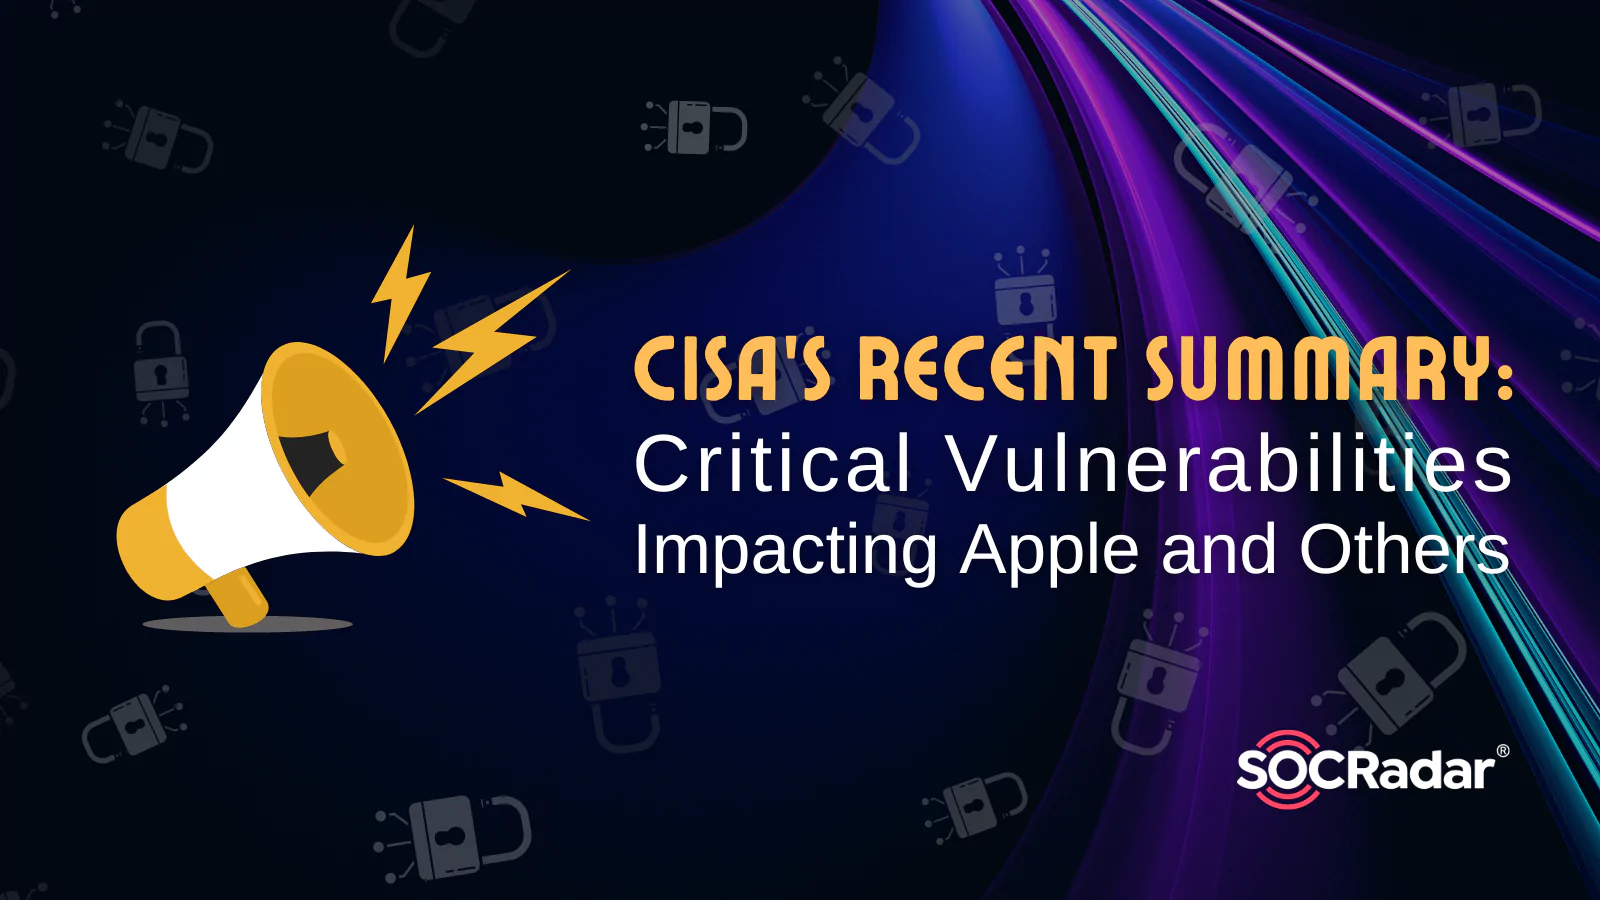 SOCRadar® Cyber Intelligence Inc. | CISA’s Recent Summary: Critical Vulnerabilities Impacting Apple and Other Prominent Entities